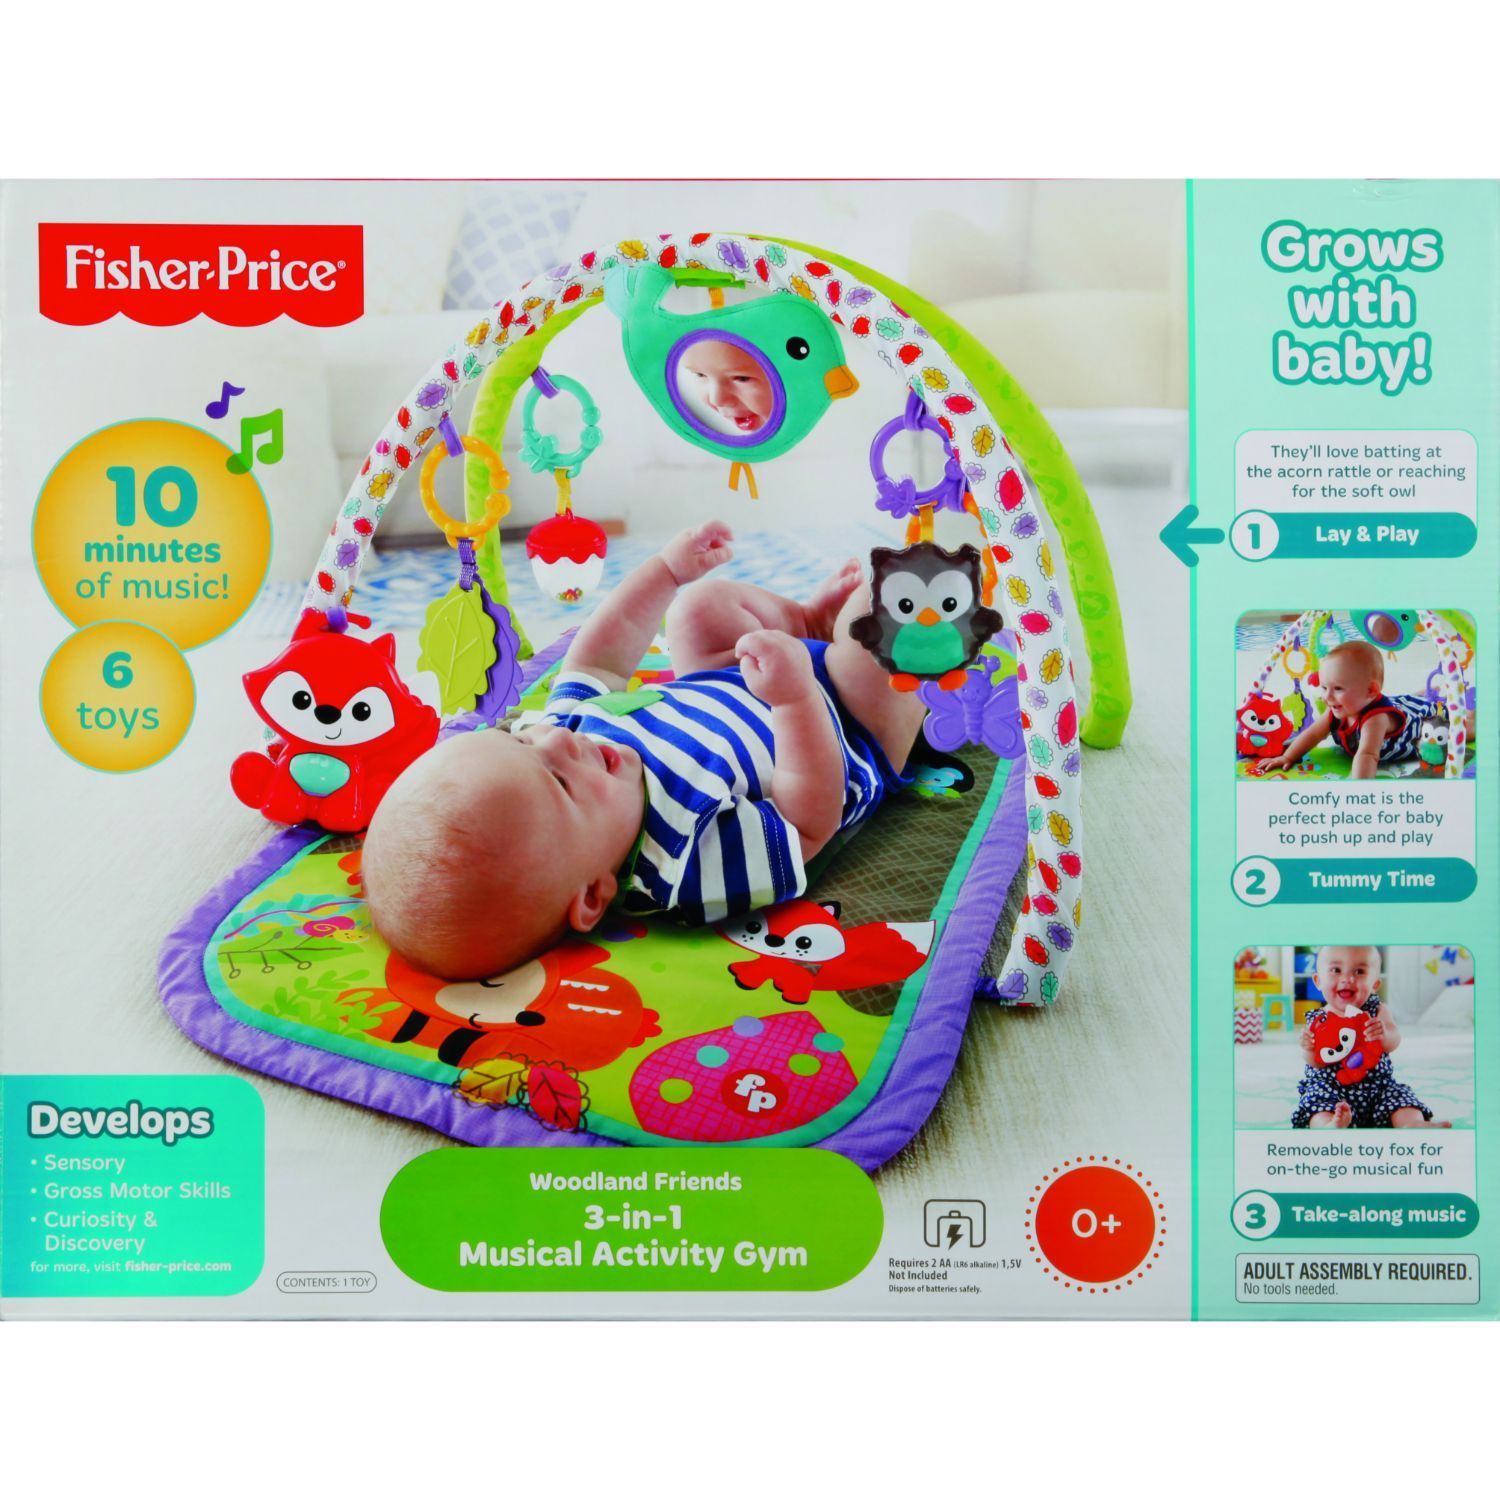 fisher price woodland friends 3 in 1 musical activity gym